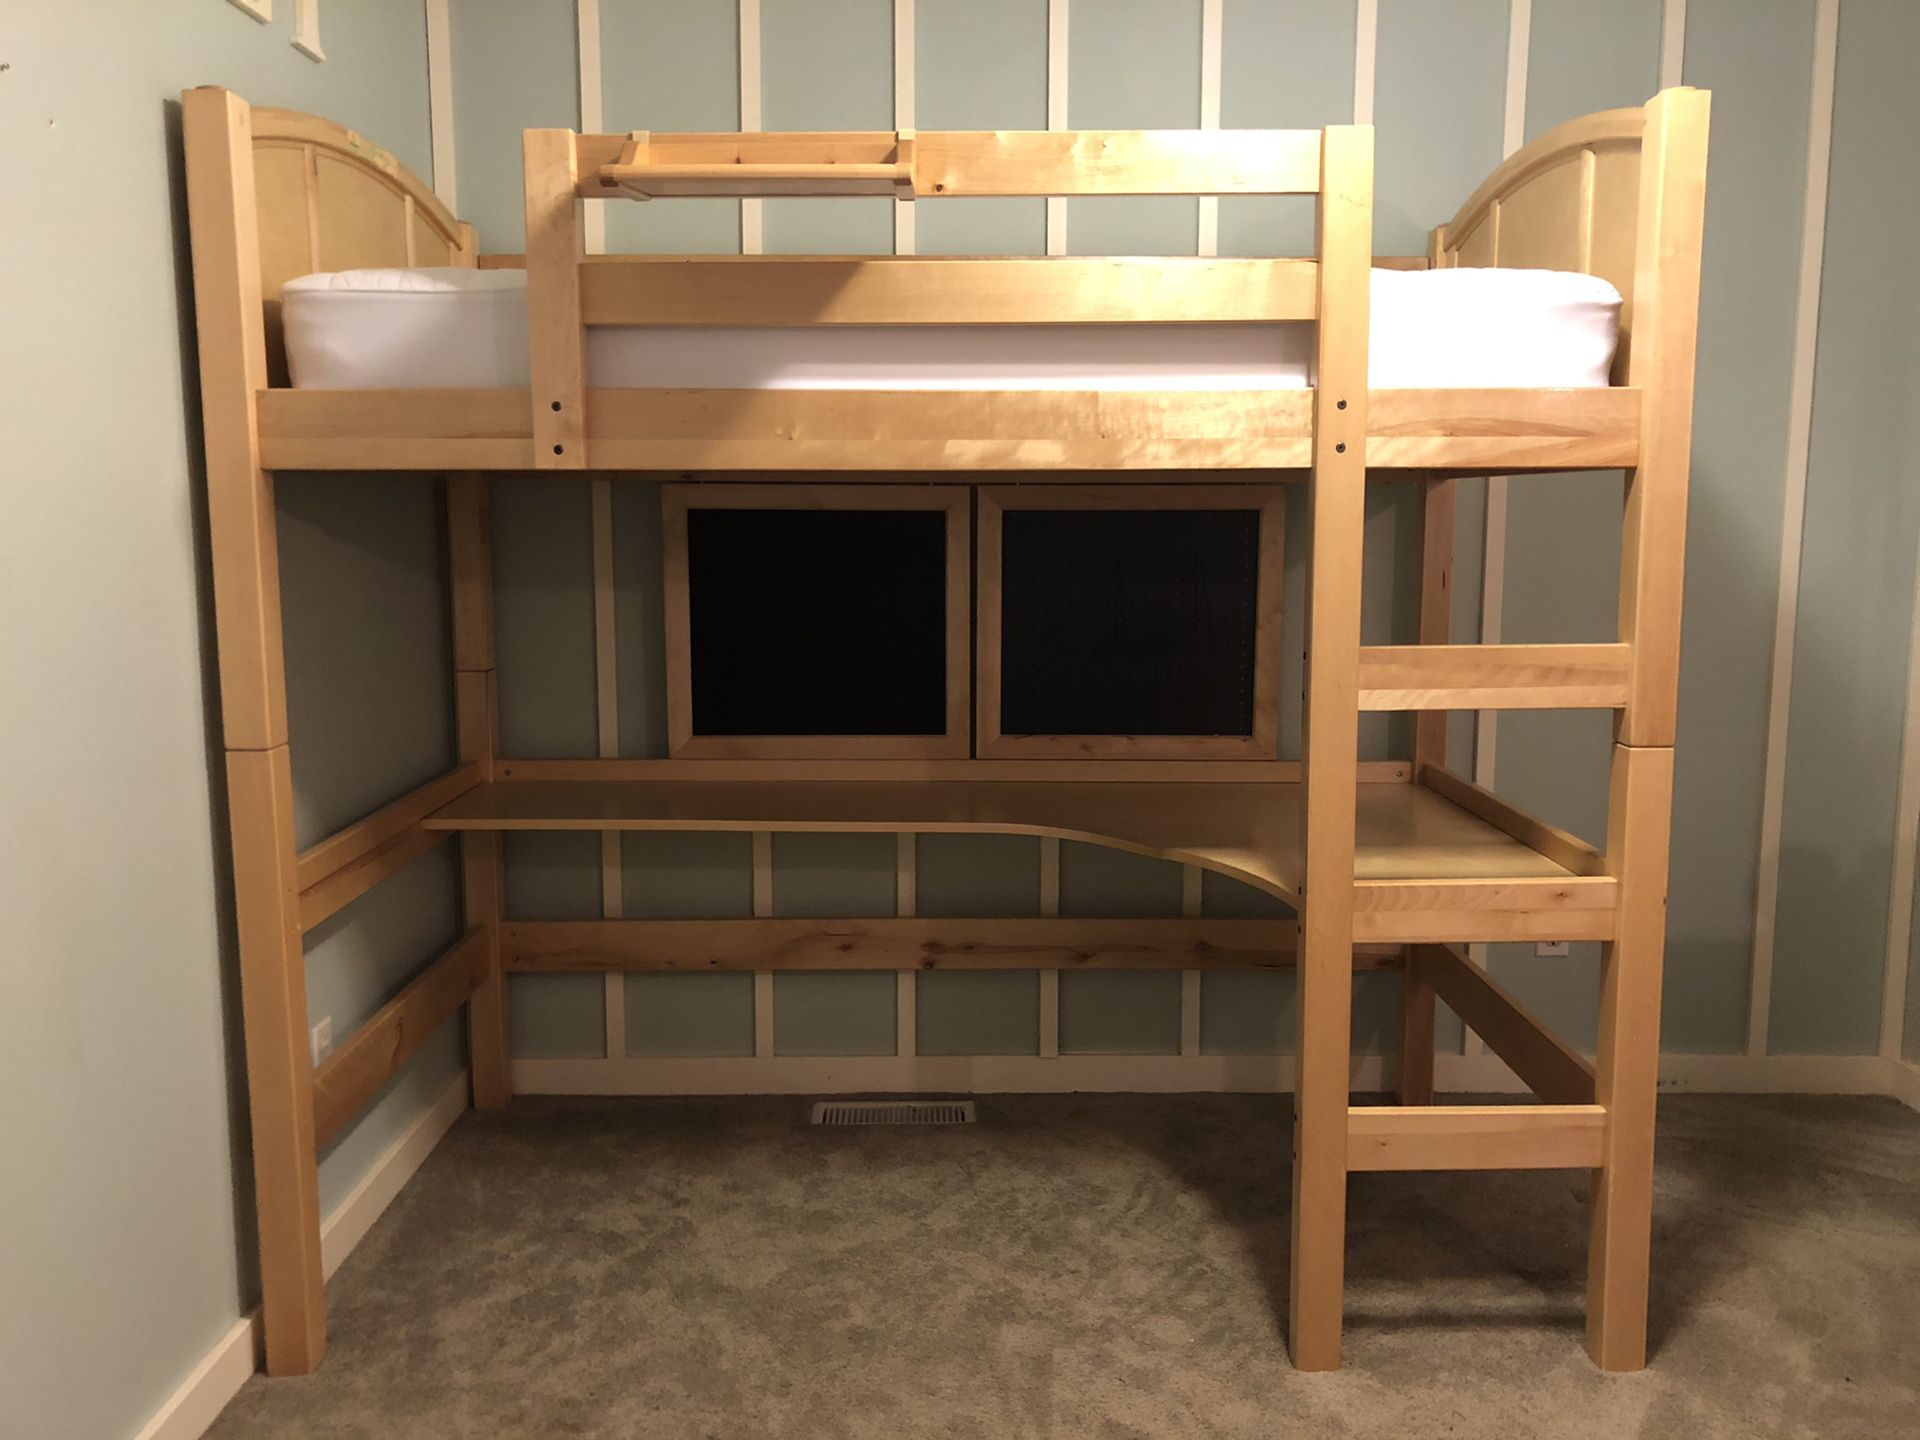 Twin Bunk Bed with Desk